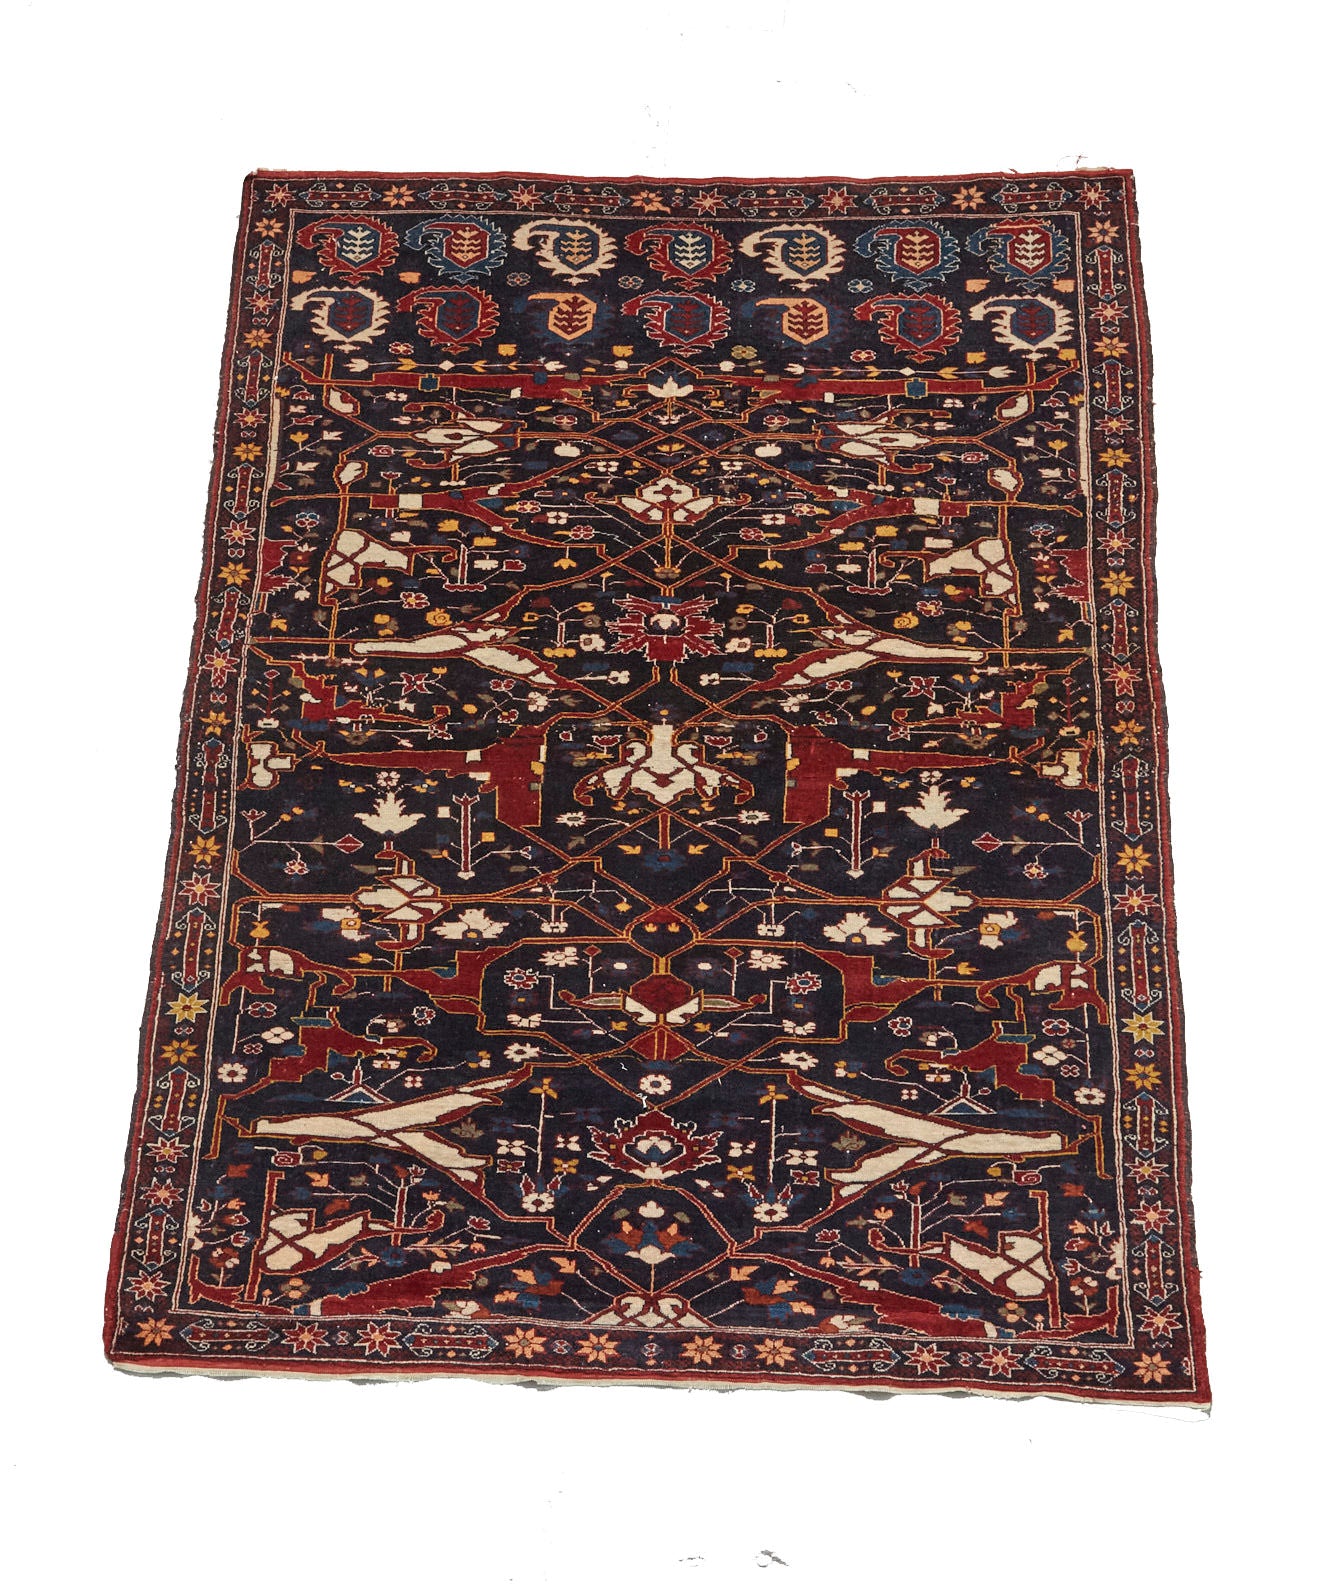 Antique Bidjar Persian Rug Sampler, hand woven with dark blue base and red, cream, gold and lighter blue shapes, beautiful piece in excellent condition for a study, bedroom or foyer rug - Available from King Kennedy Rugs Los Angeles